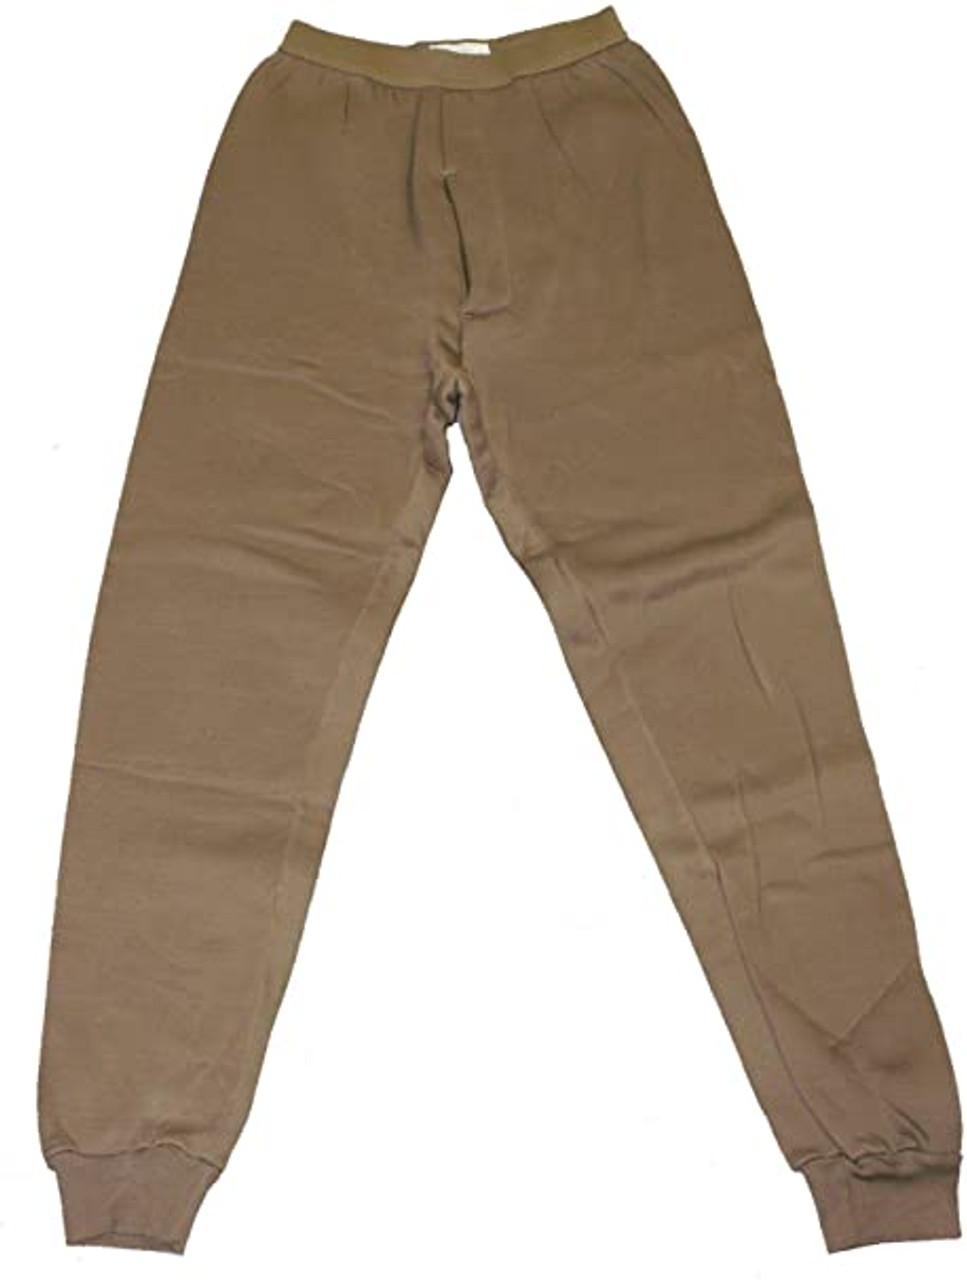 Genuine US Military Issue PolyPro ECWCS Thermal Bottoms, Cold Weather Gear